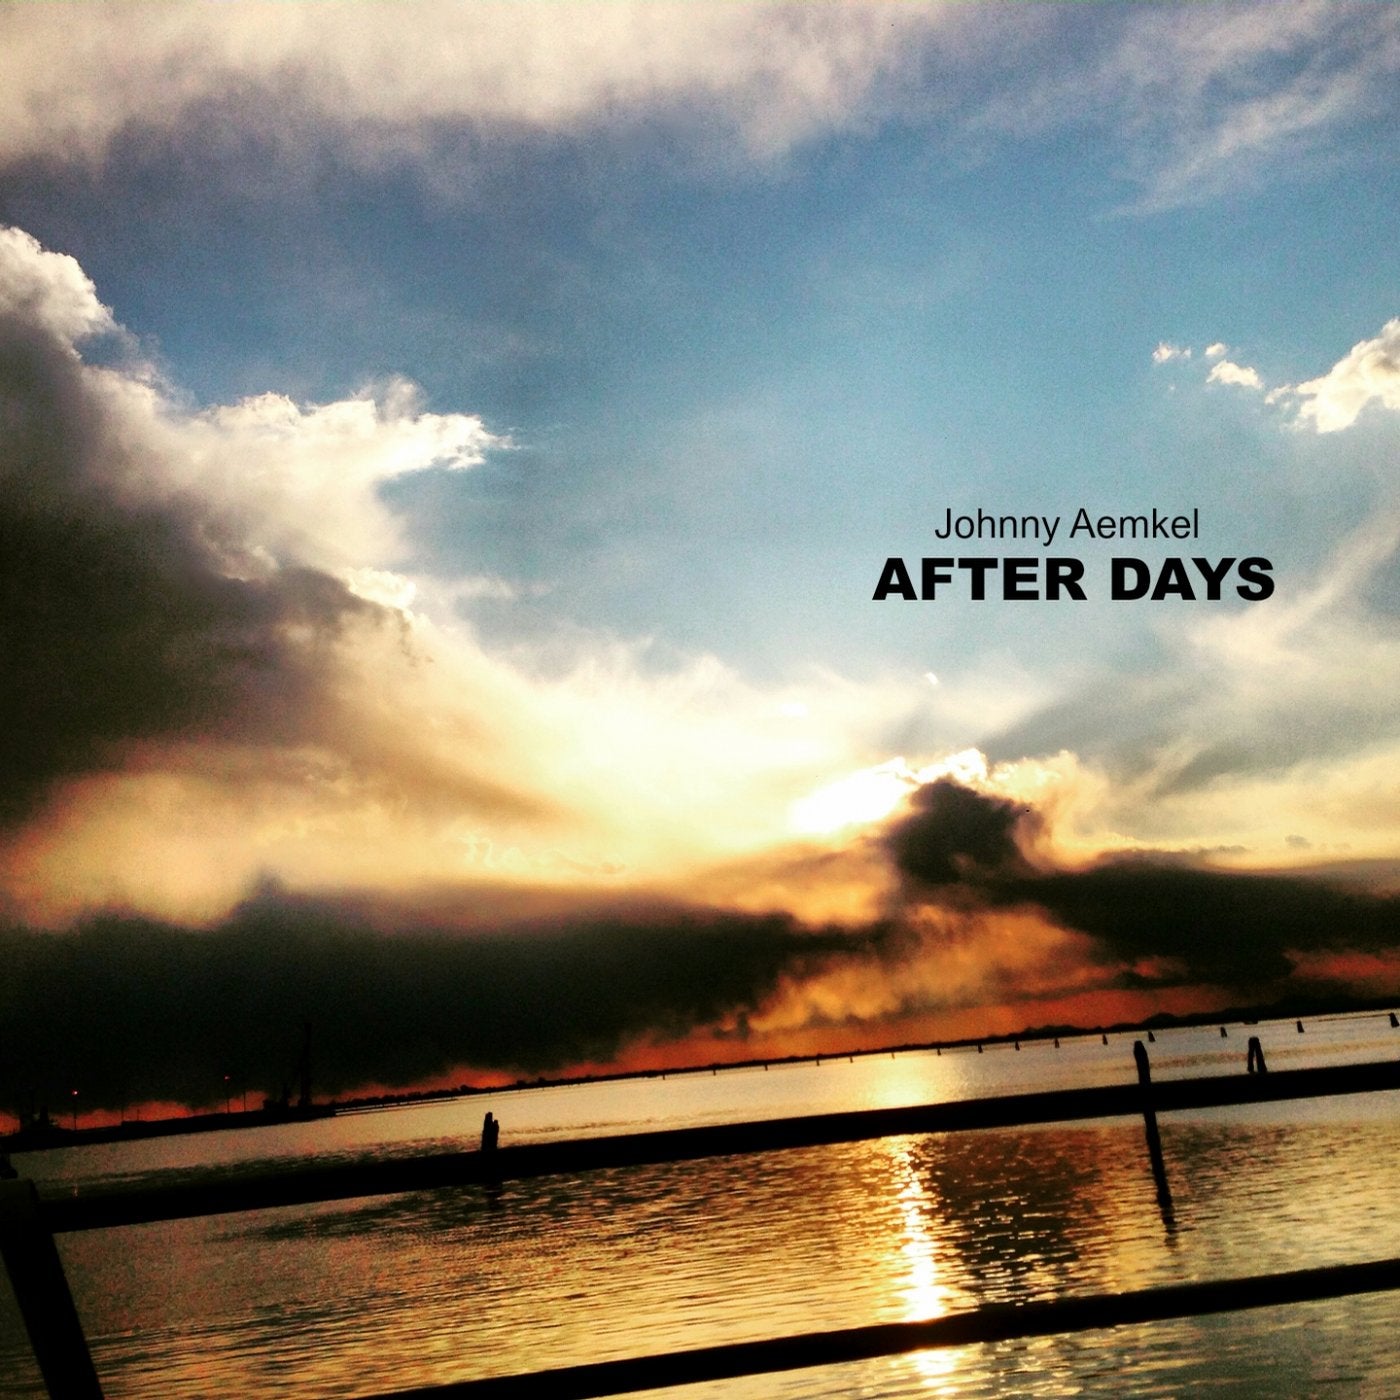 After Days